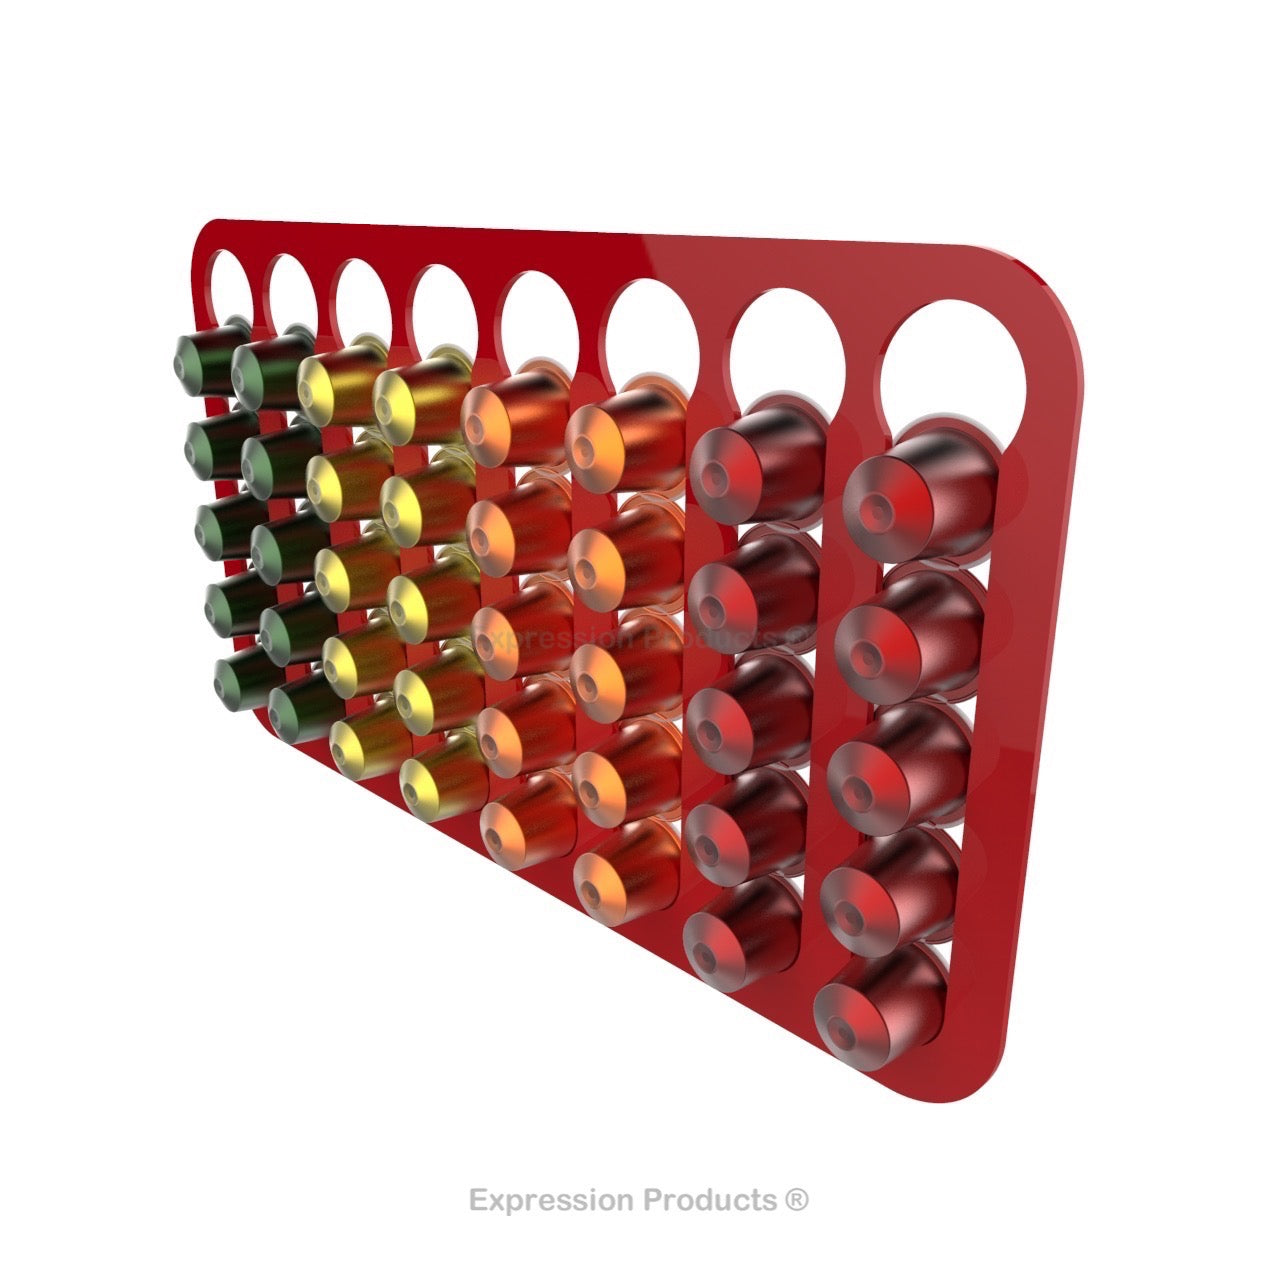 Magnetic Nespresso Original Line coffee pod holder shown in red holding 40 pods